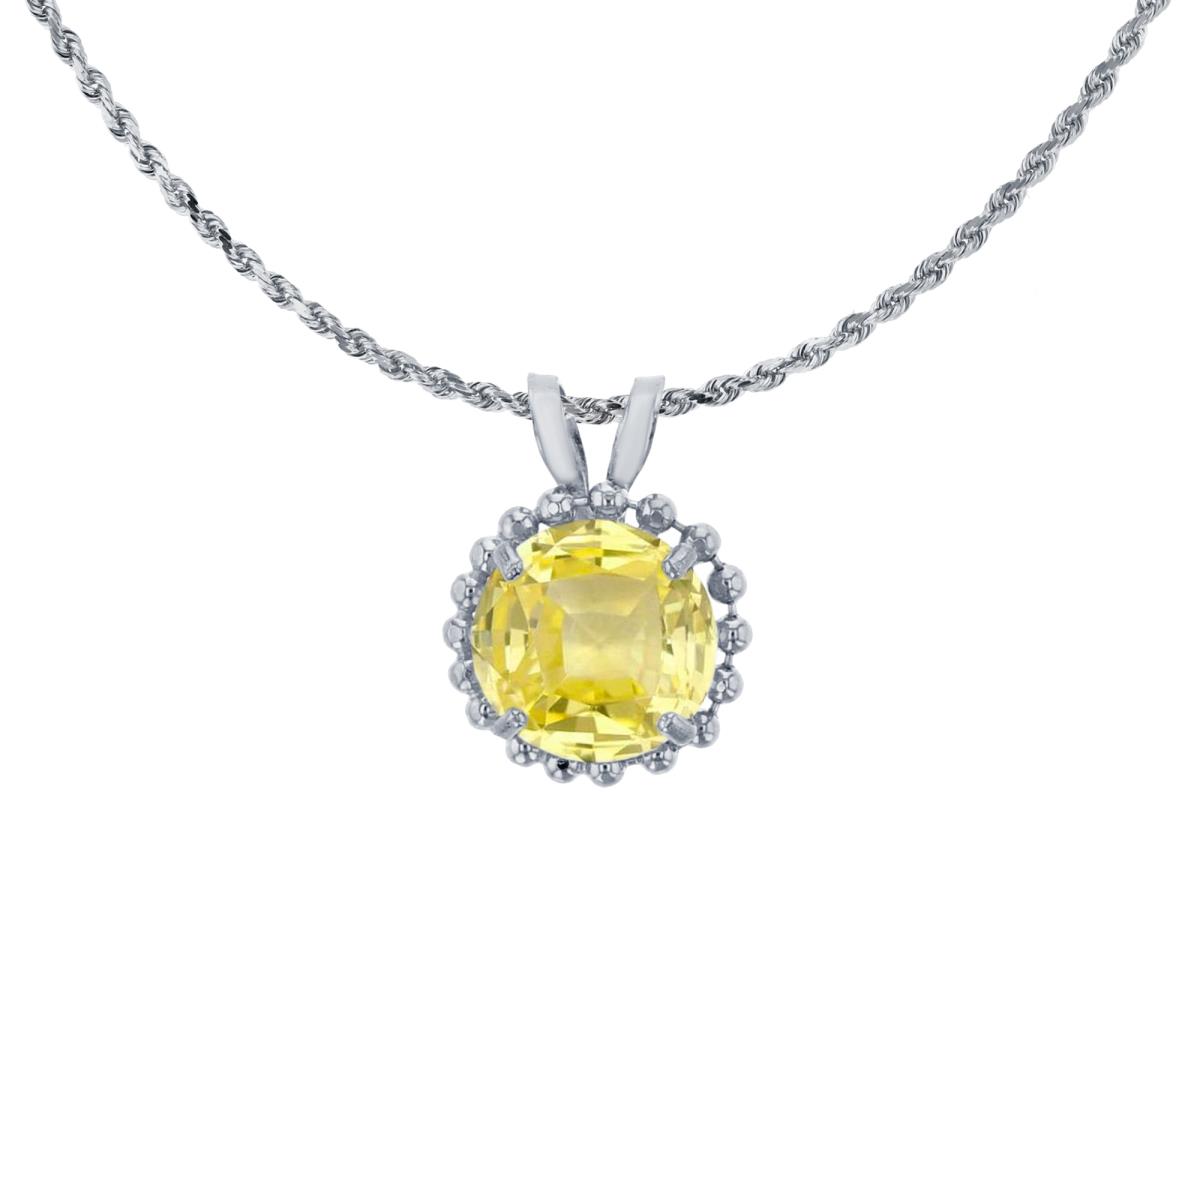 10K White Gold 6mm Rd Cut Created Yellow Sapphire with Bead Frame Rabbit Ear 18" Necklace